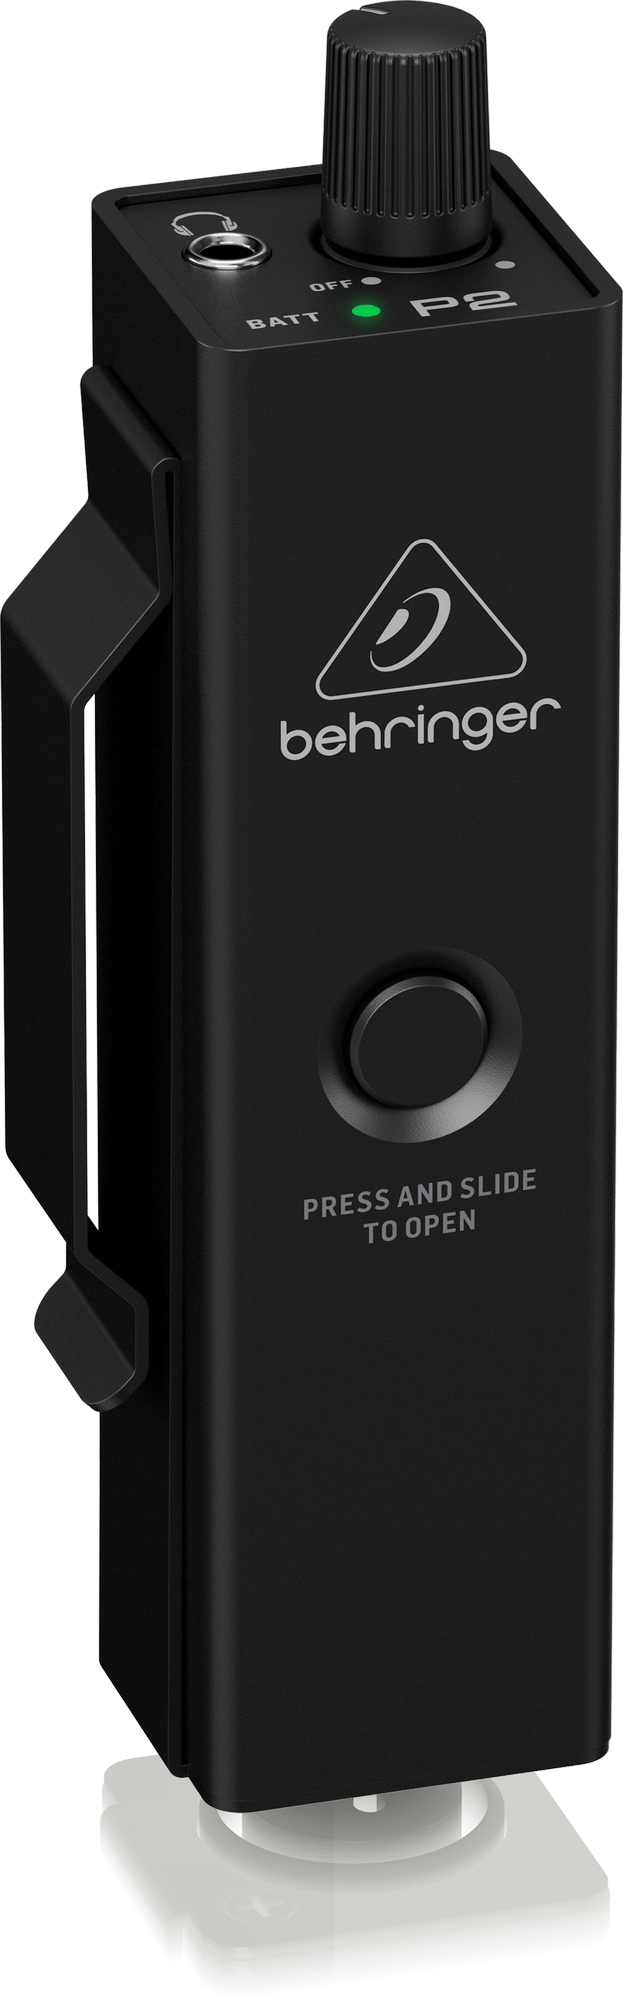 Behringer | Product | P2